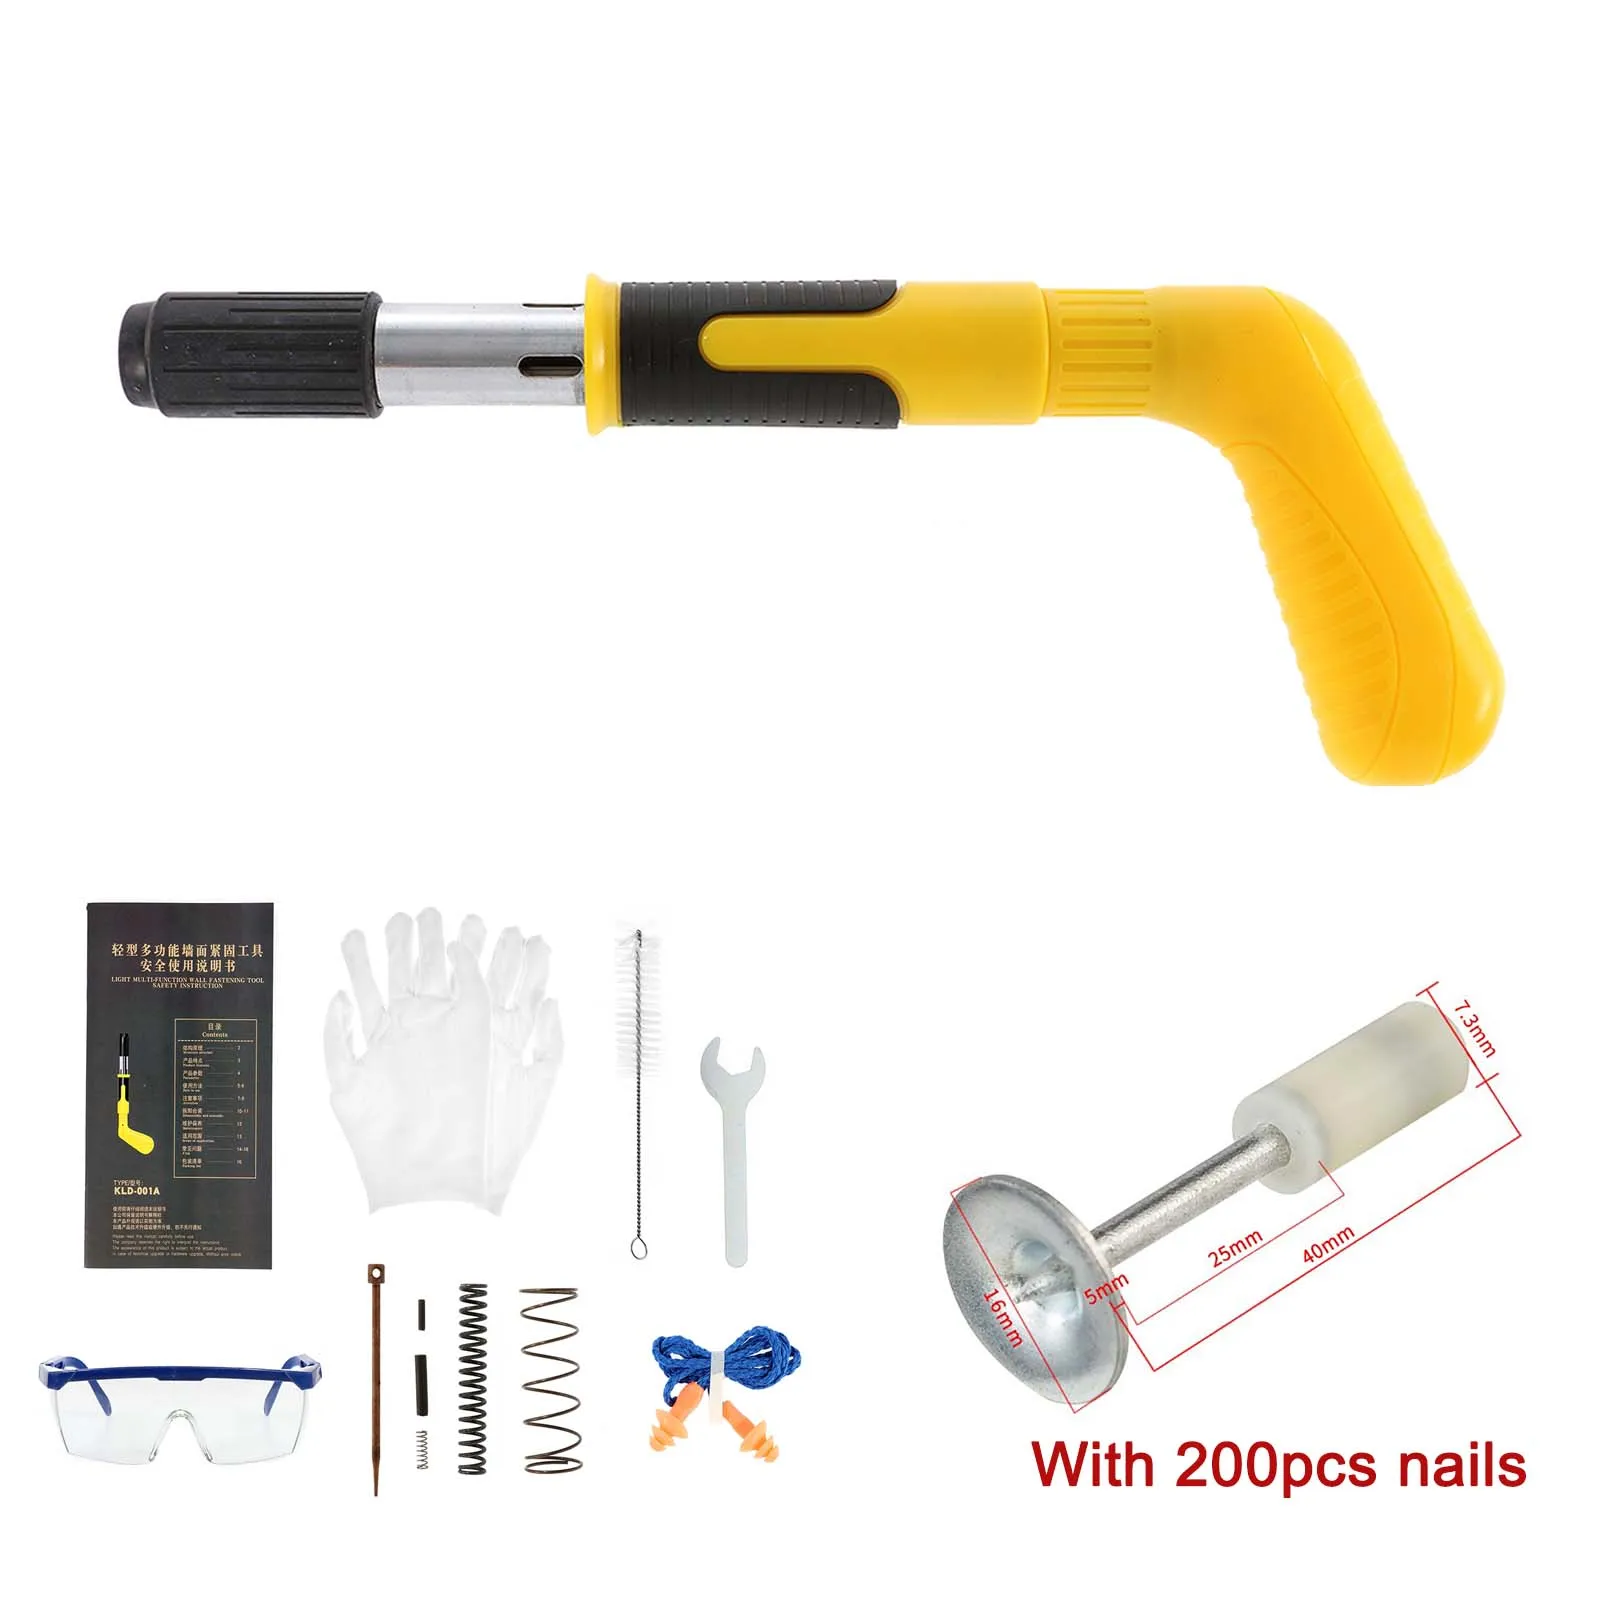 Power Tools Steel Nails Guns Rivet Tool Concrete Wall Anchor Wire Slotting Device Decoration Tufting Gun With 200pcs Nails